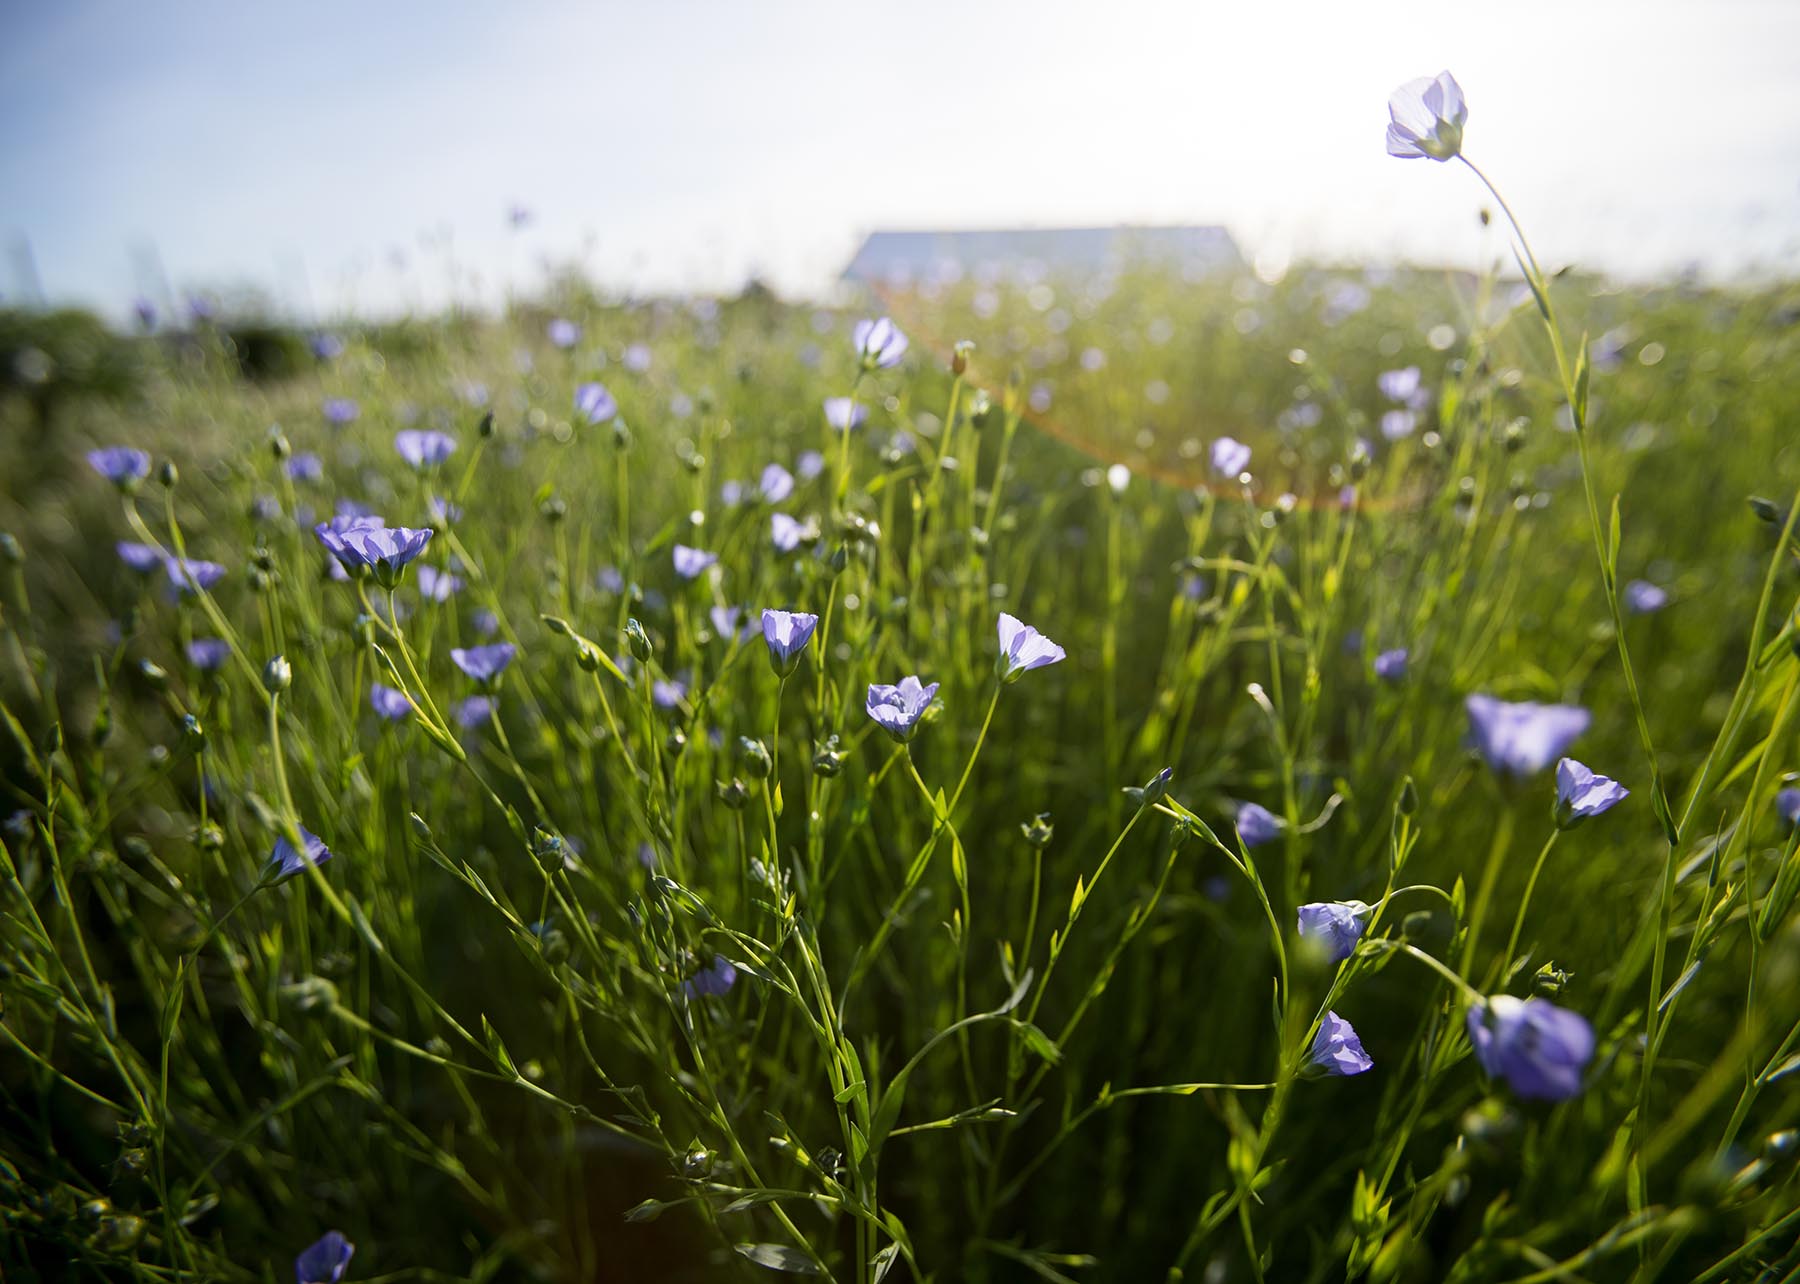 Flax in flower, photo by Paige Green of Fibershed